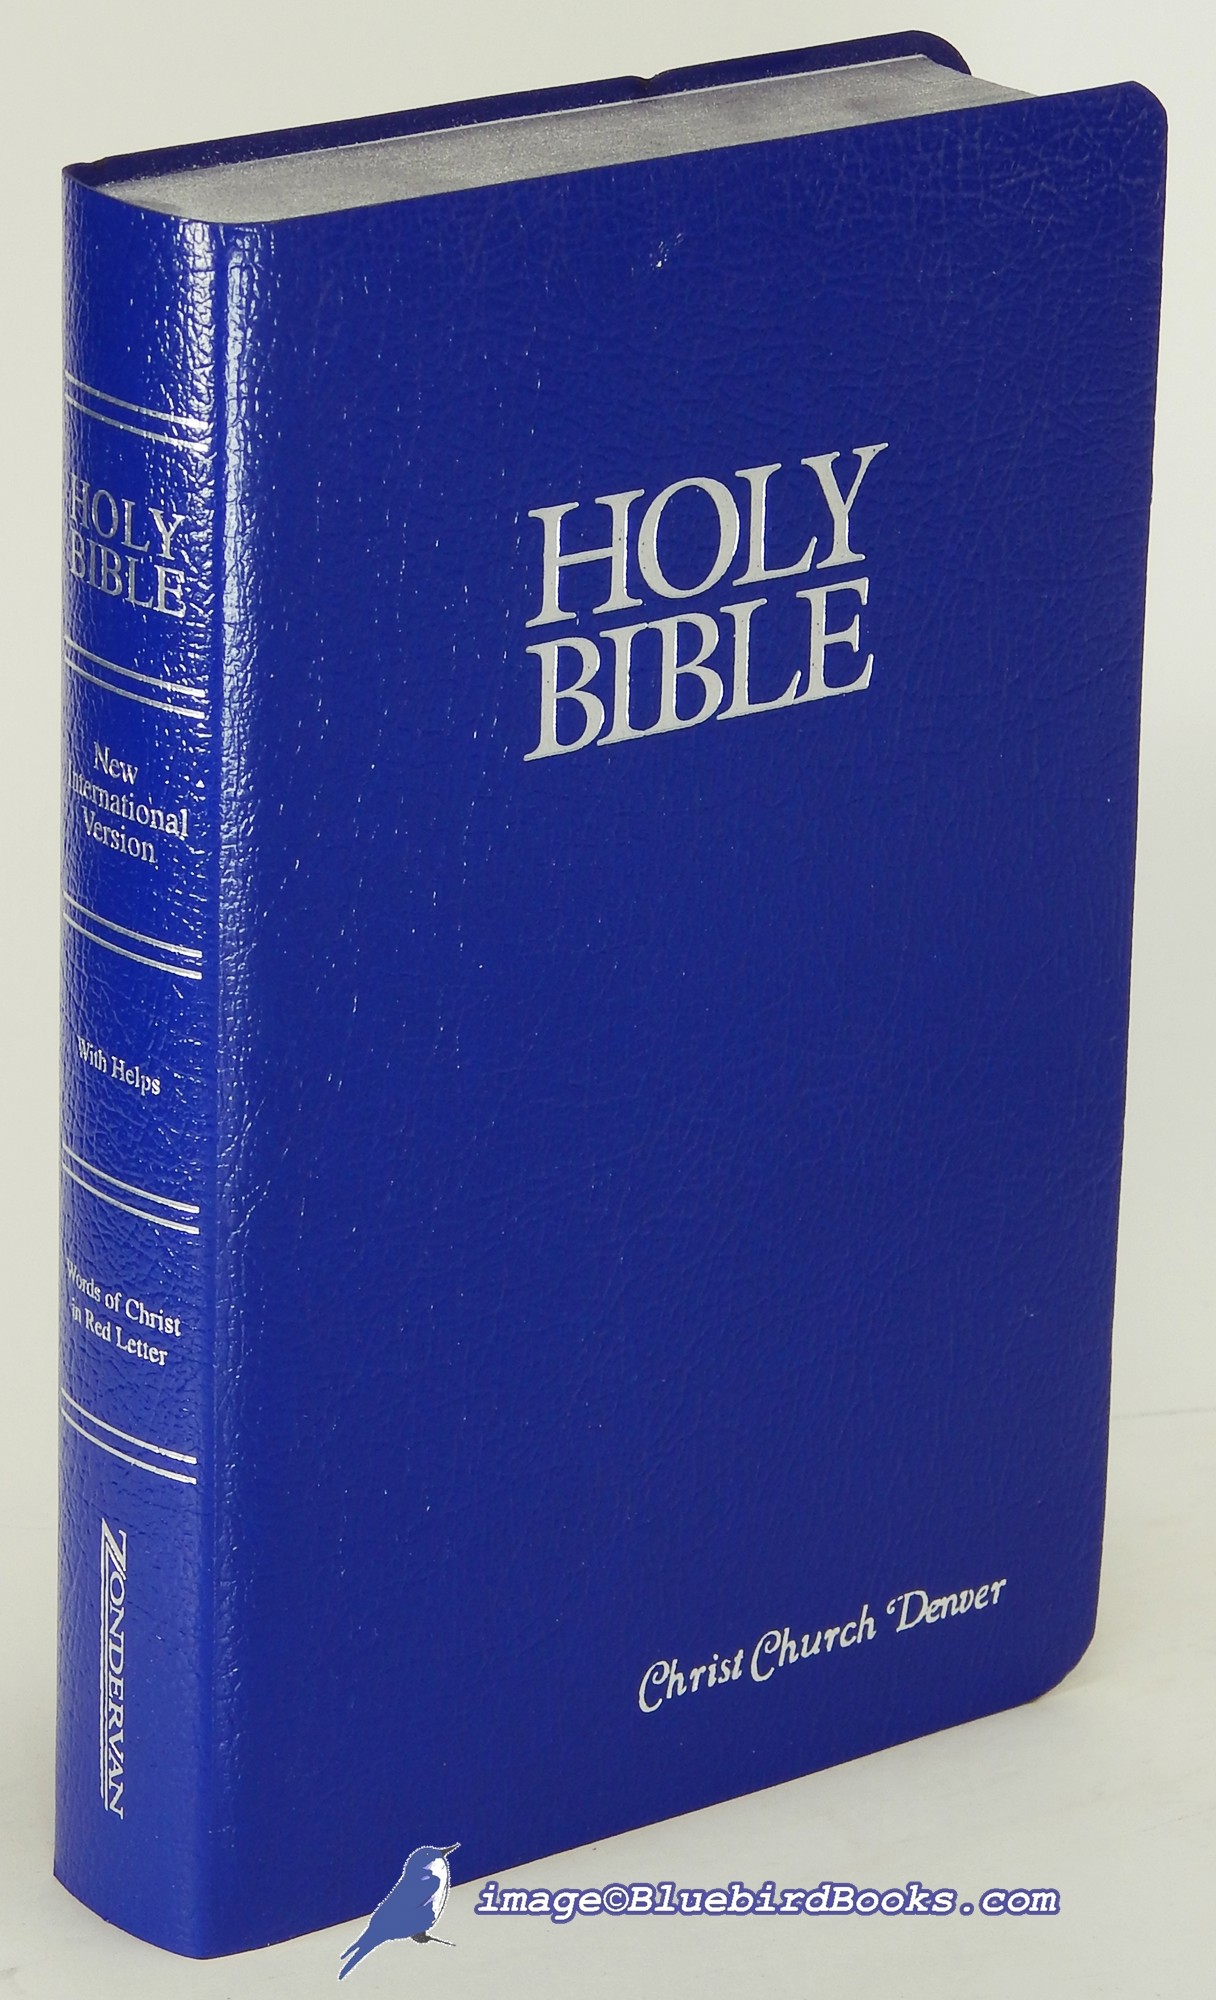  - The Holy Bible: New International Version (Zondervan Gift & Award Bible, Words of Christ in Red)